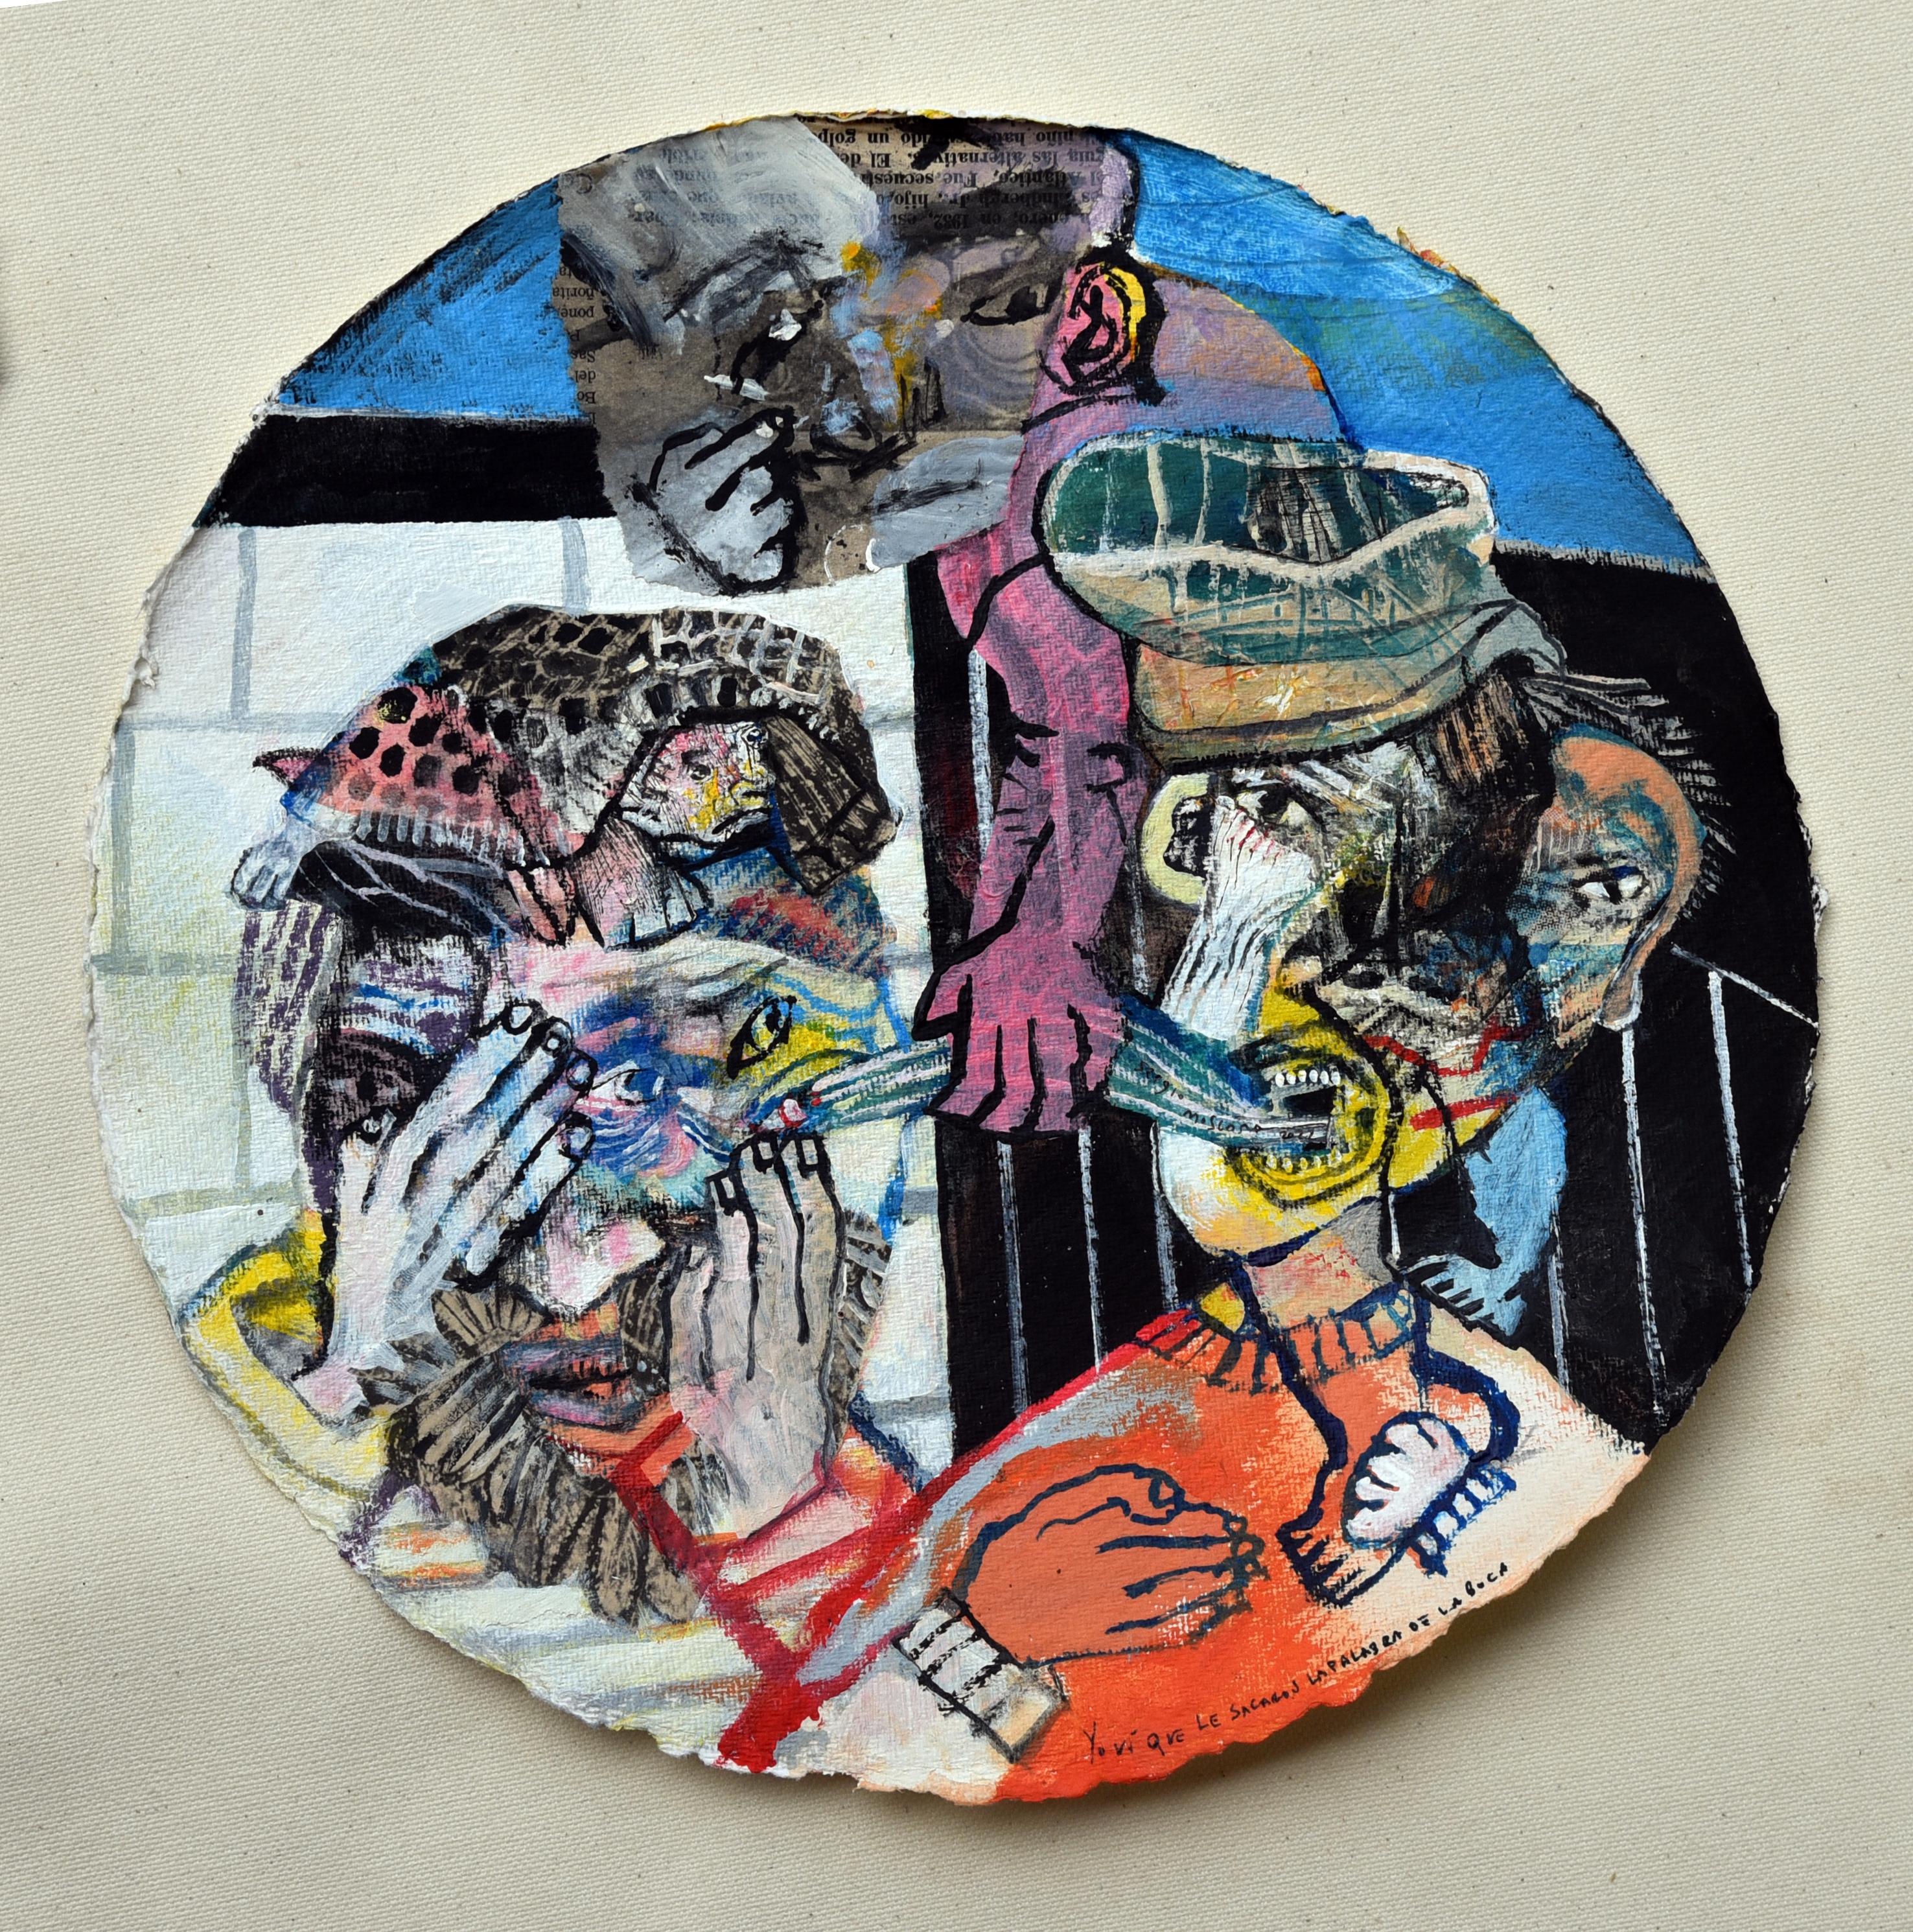 Acrylic paint and ink on paper
Tondo (diameter 30 cm)
Hand-signed and dated lower right by the artist